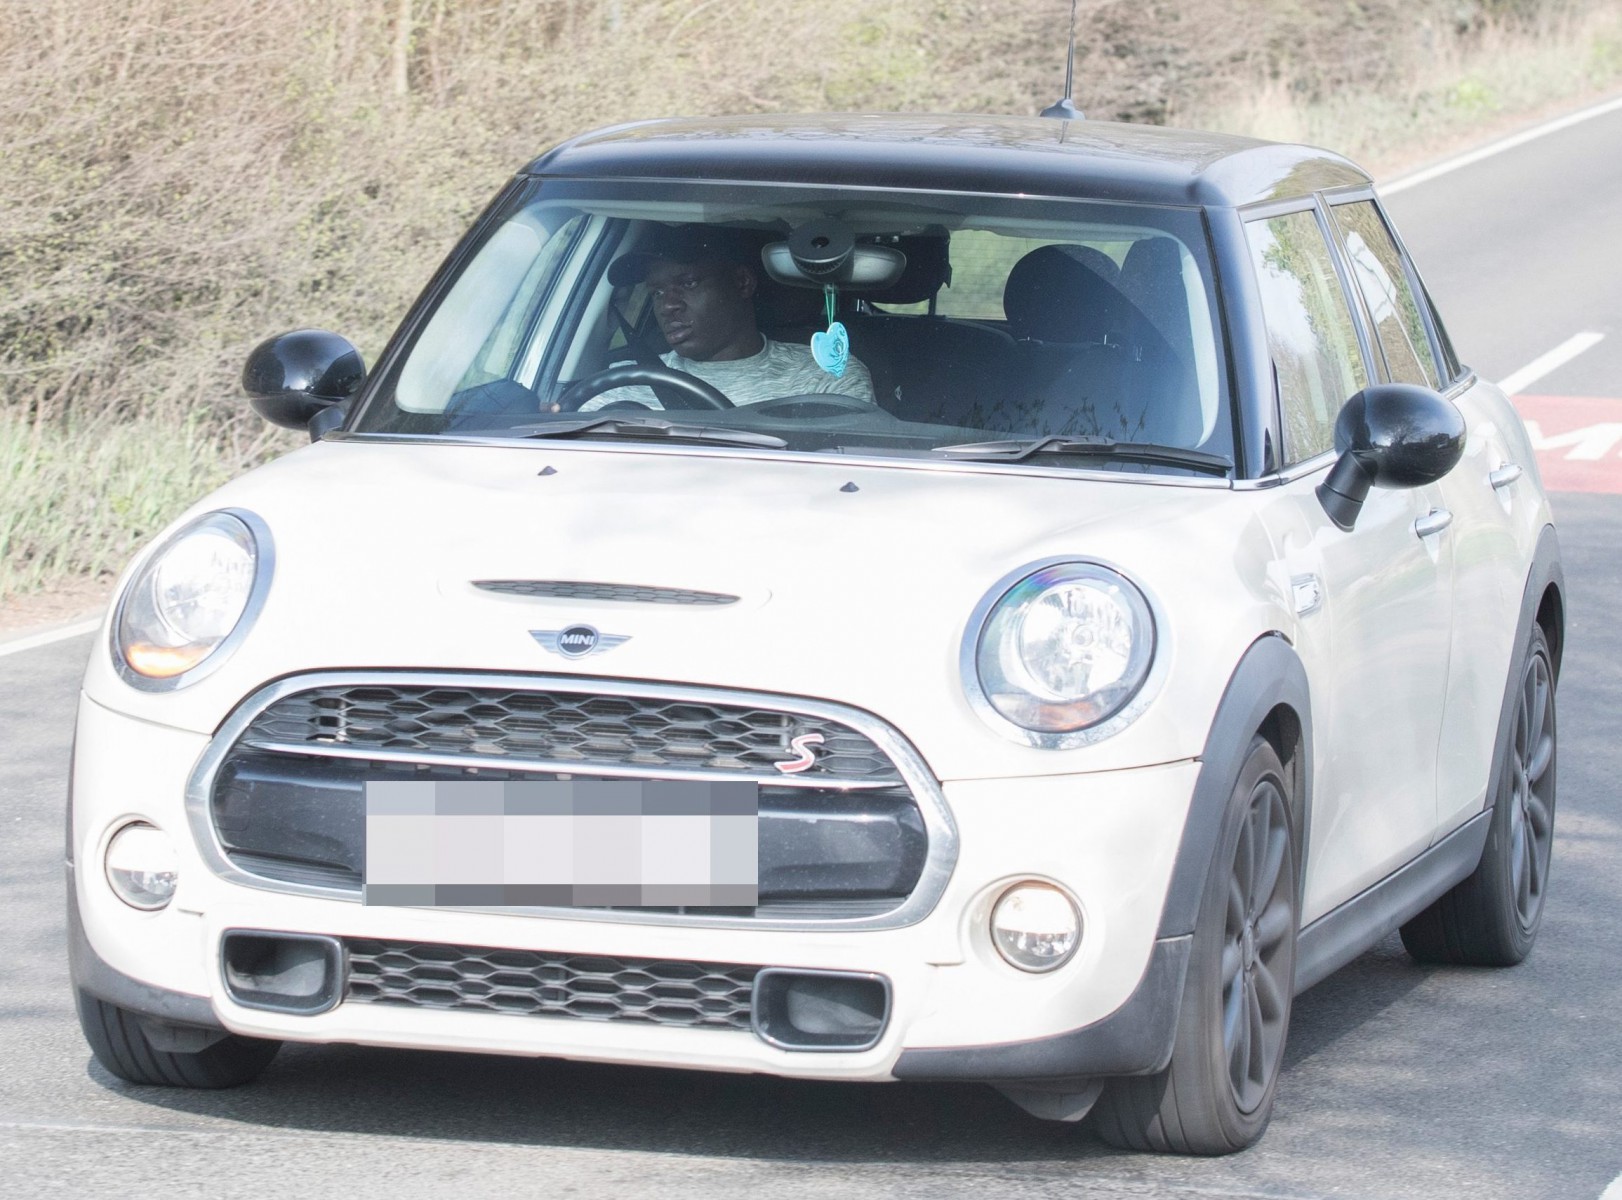 , NGolo Kante still drives the same Mini hes owned since signing for Leicester in 2015, and its now worth just 10,345